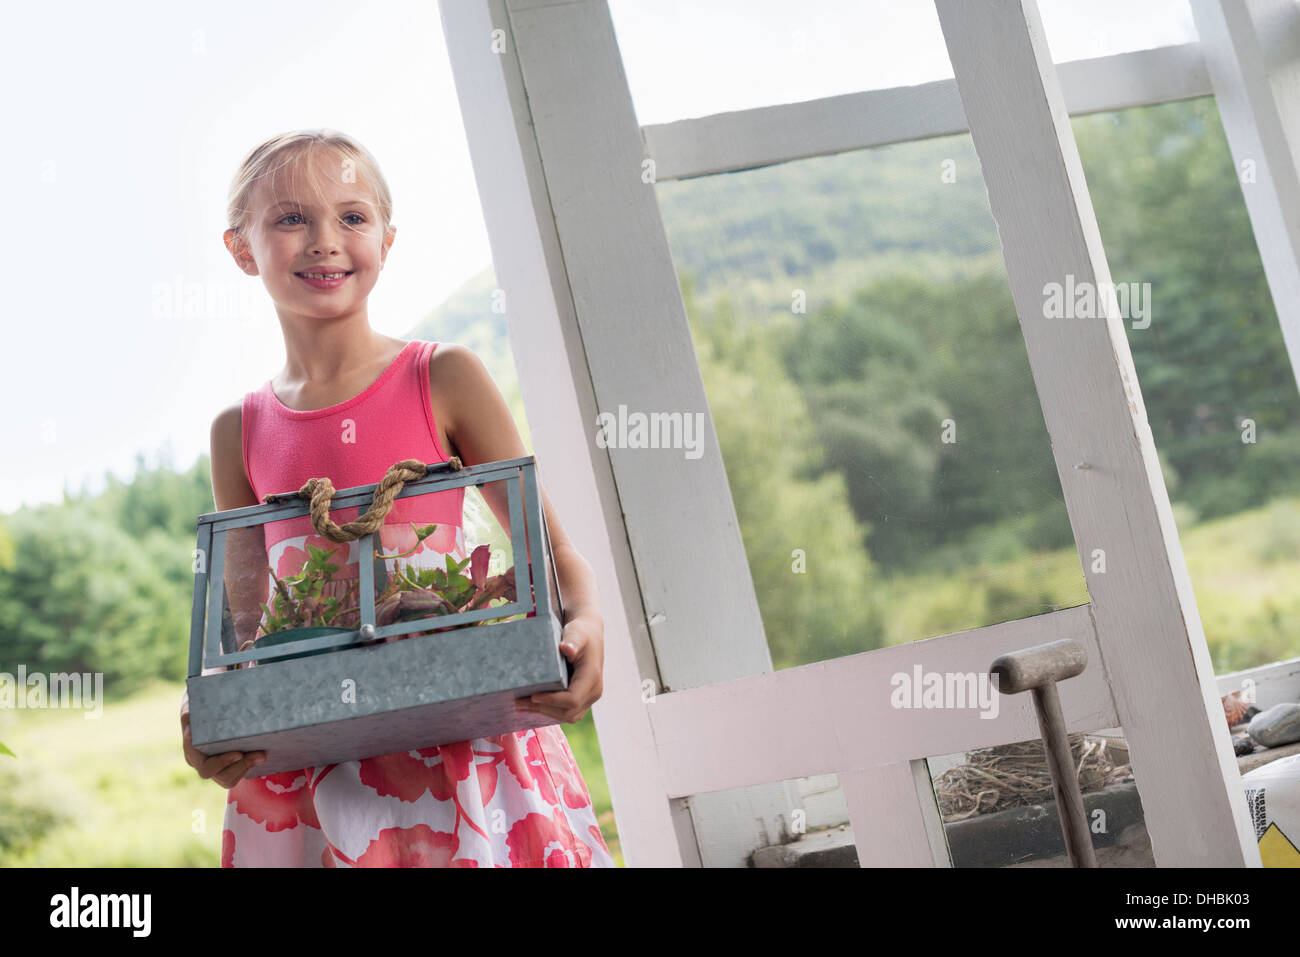 A young girl in a kitchen wearing a pink dress.  Carrying a terrarium containing small plants. Stock Photo